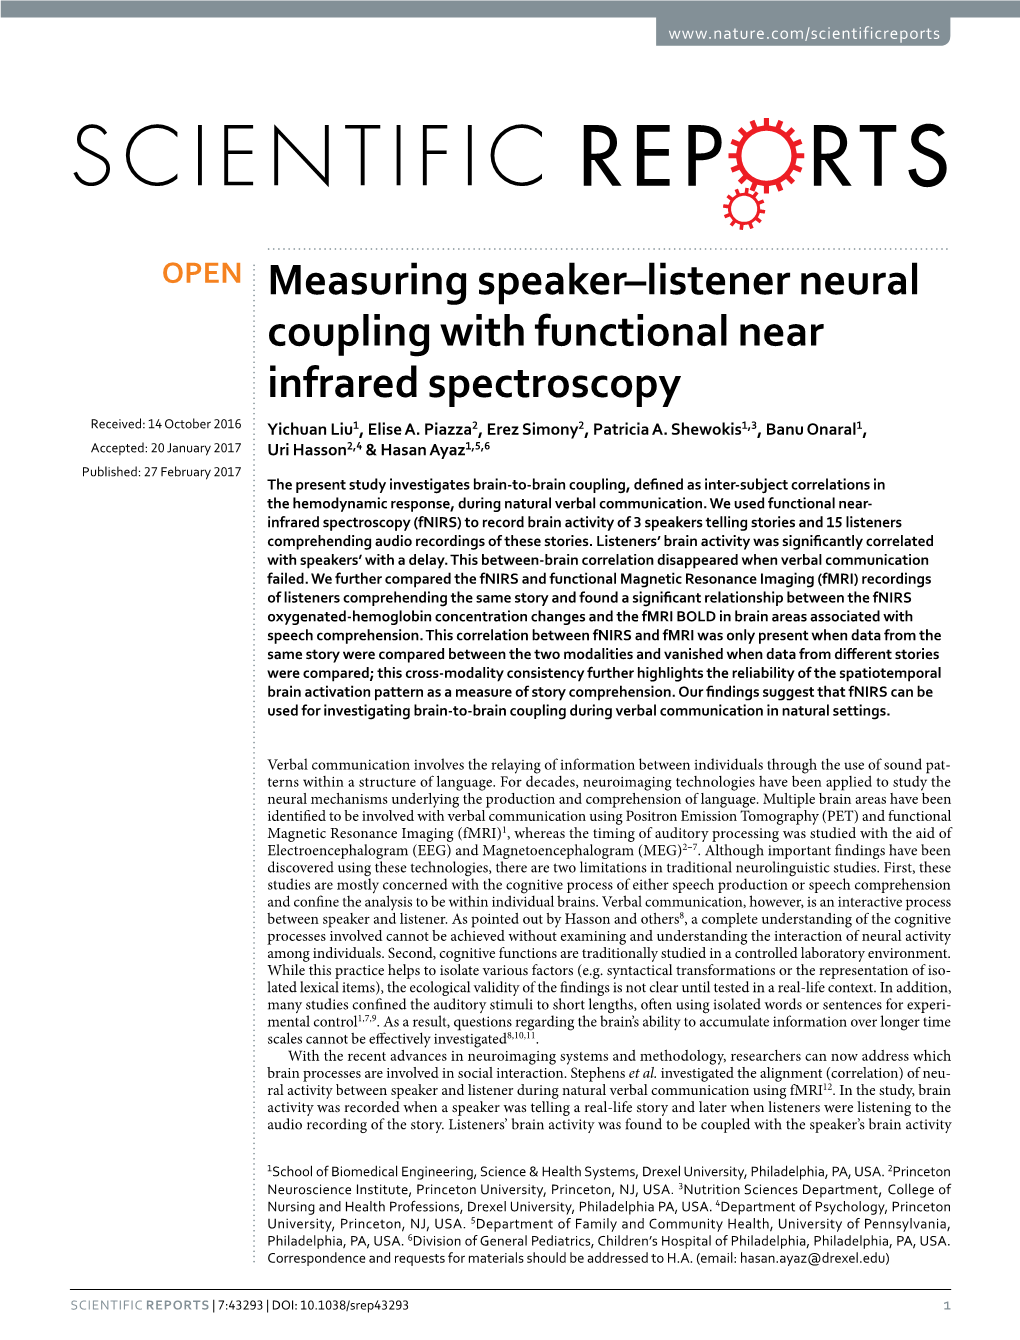 Measuring Speaker–Listener Neural Coupling with Functional Near Infrared Spectroscopy Received: 14 October 2016 Yichuan Liu1, Elise A